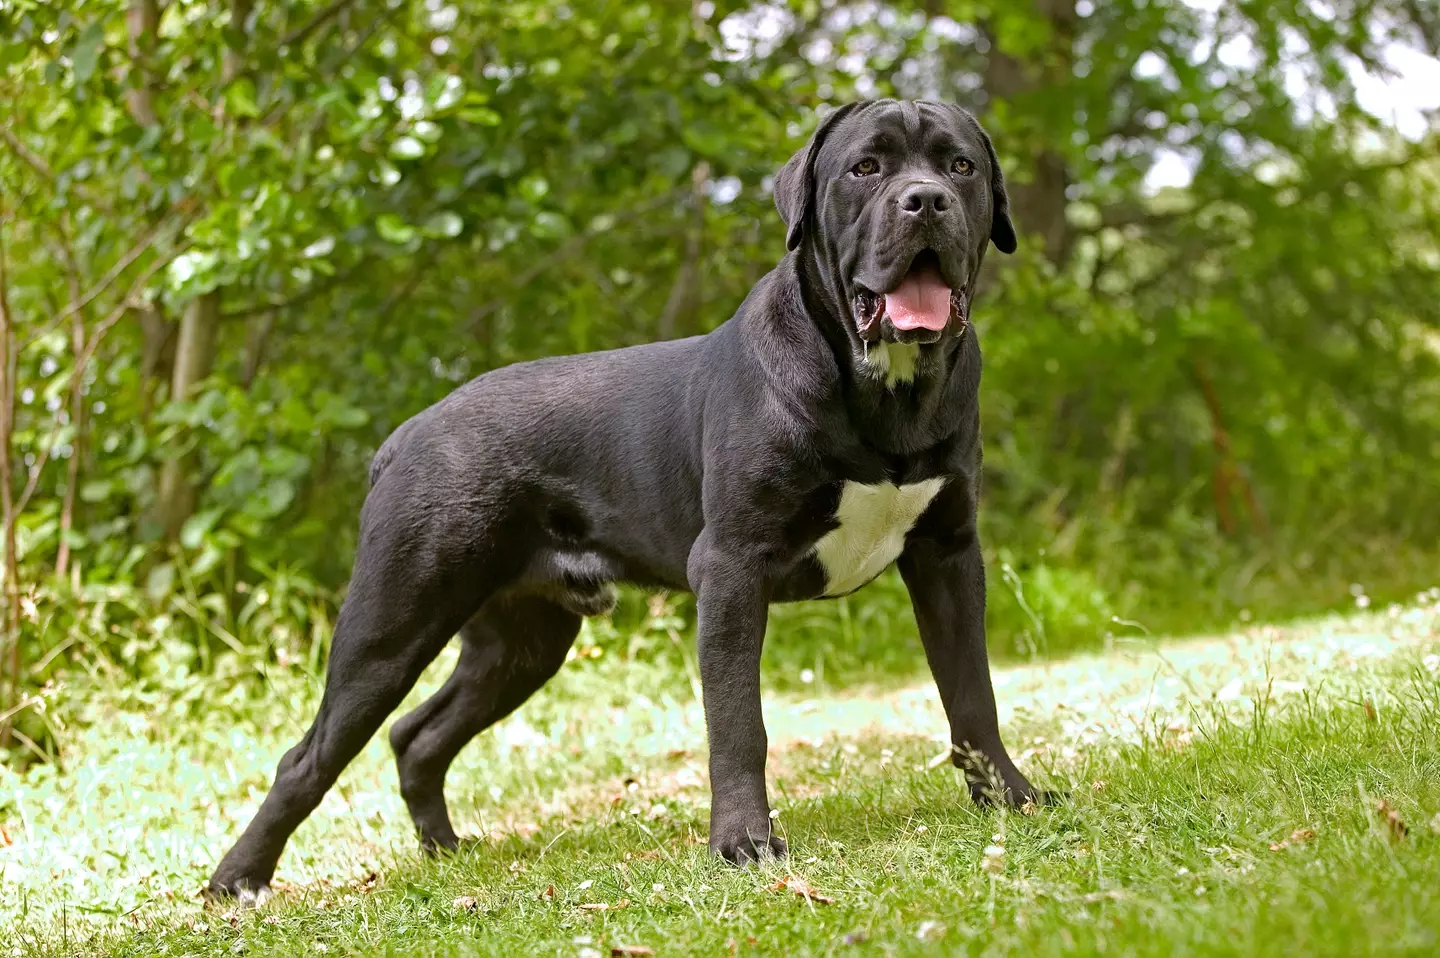 One expert has warned that ‘backyard breeders’ will simply breed another type of dog.